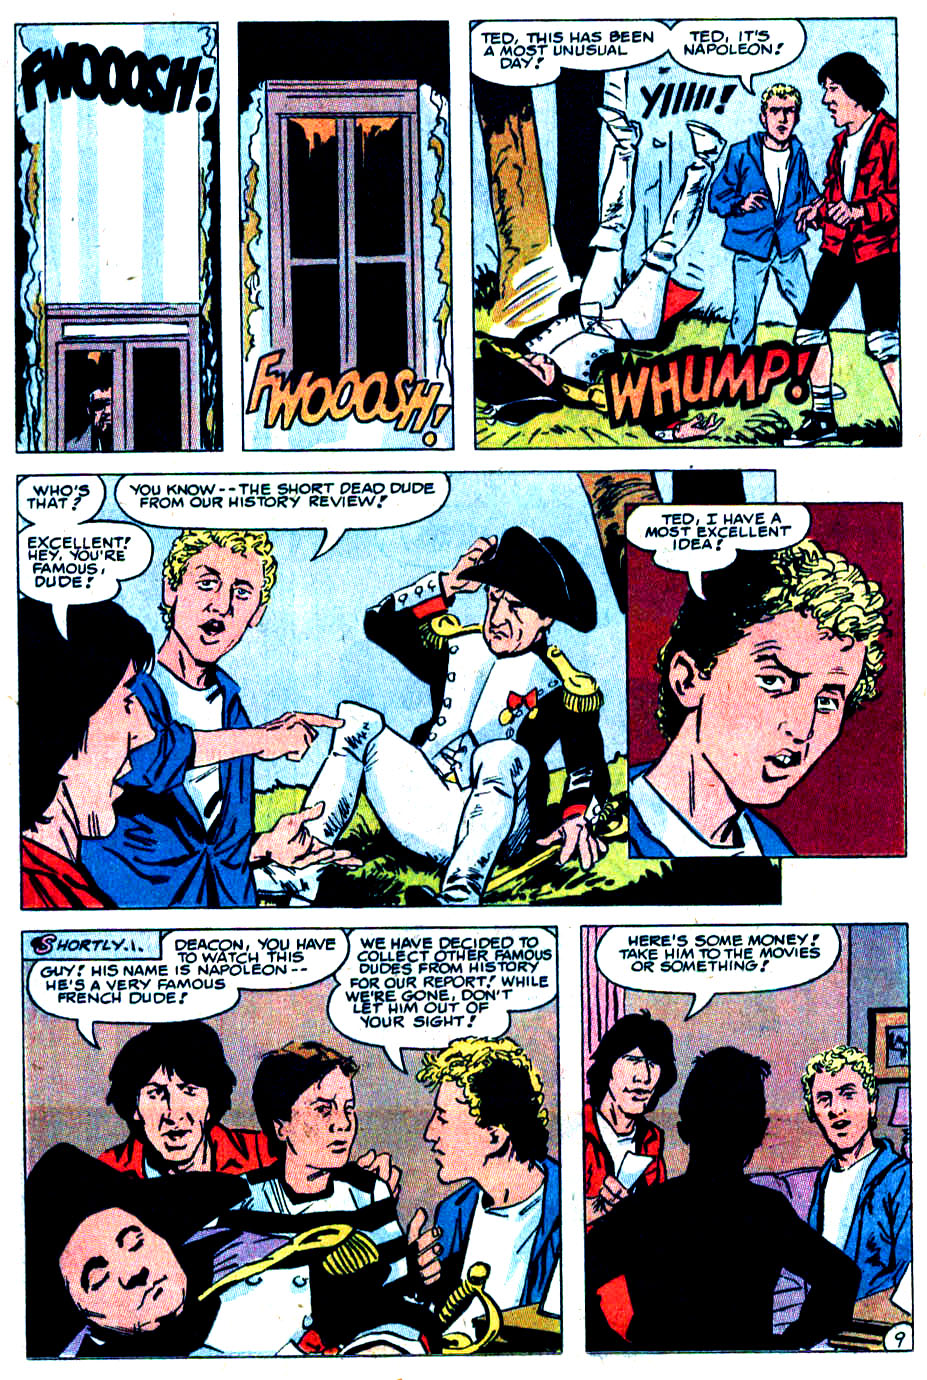 Read online Bill & Ted's Excellent Adventure comic -  Issue # Full - 9